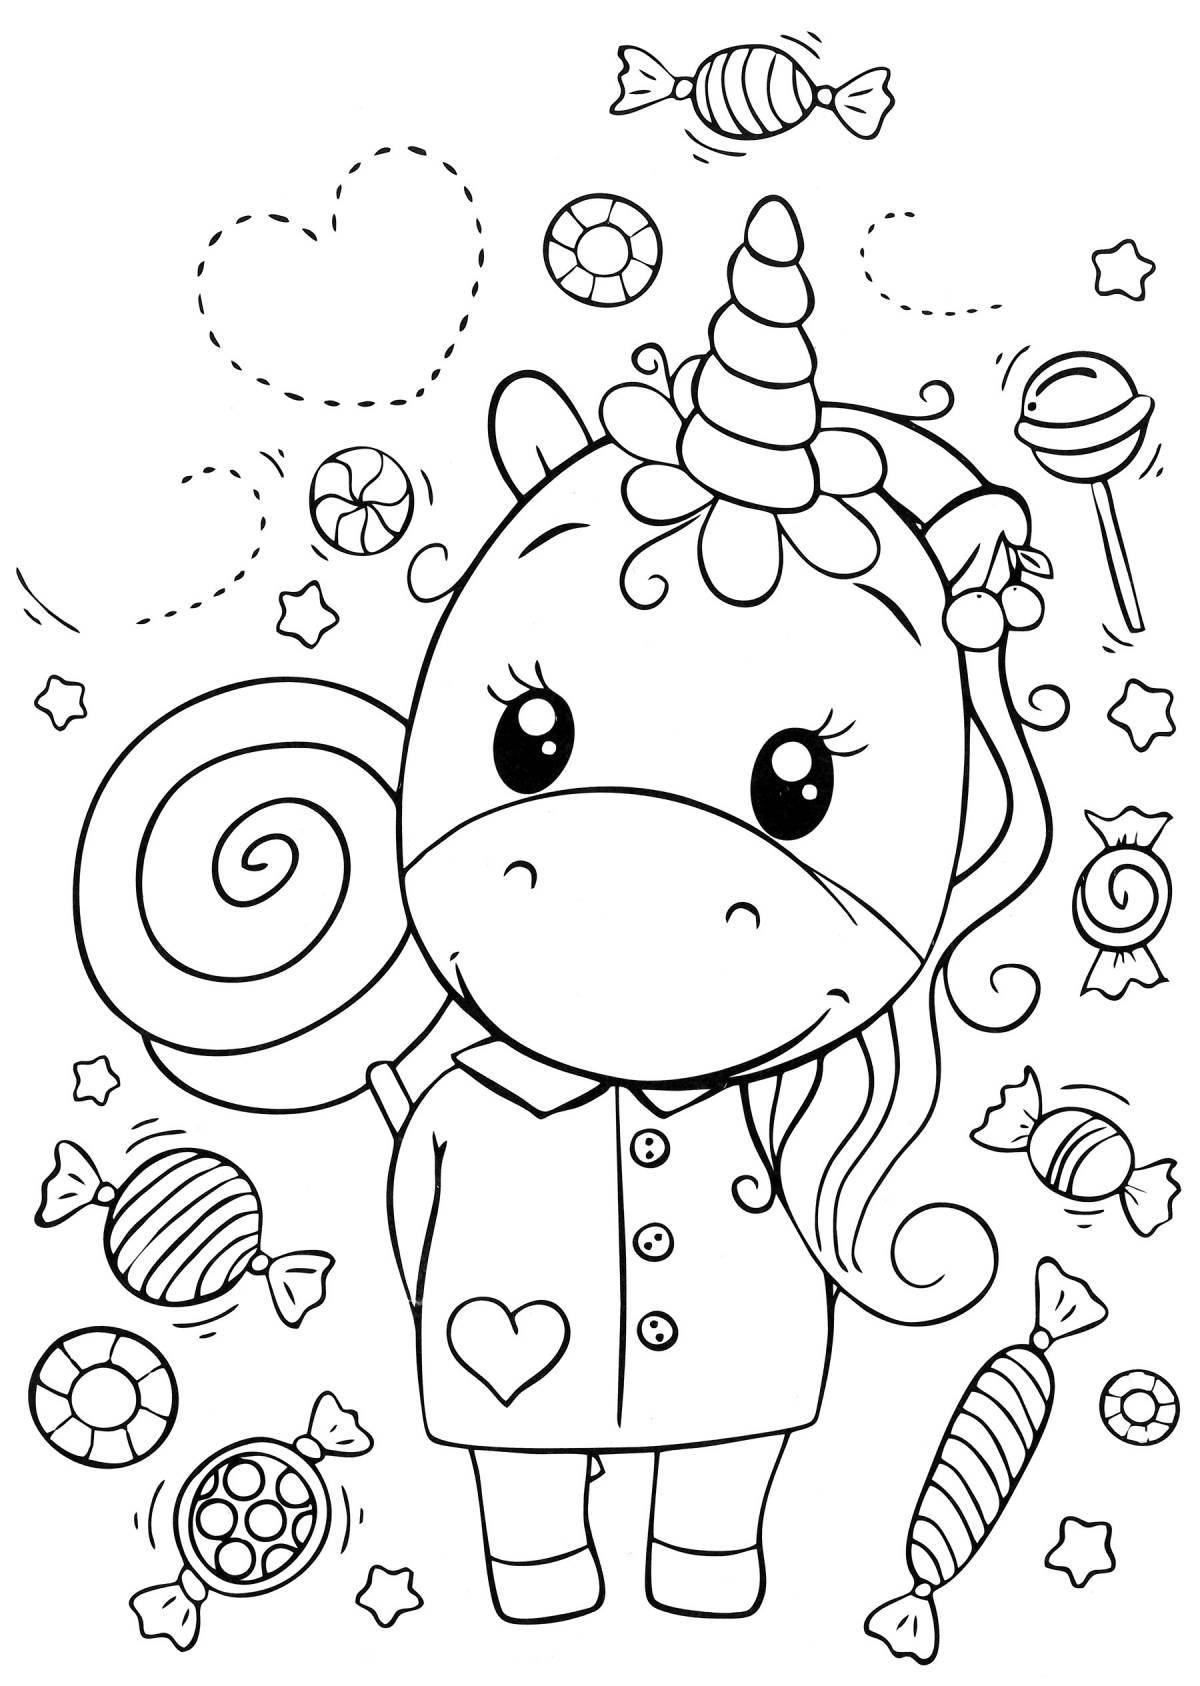 Playful coloring include unicorns